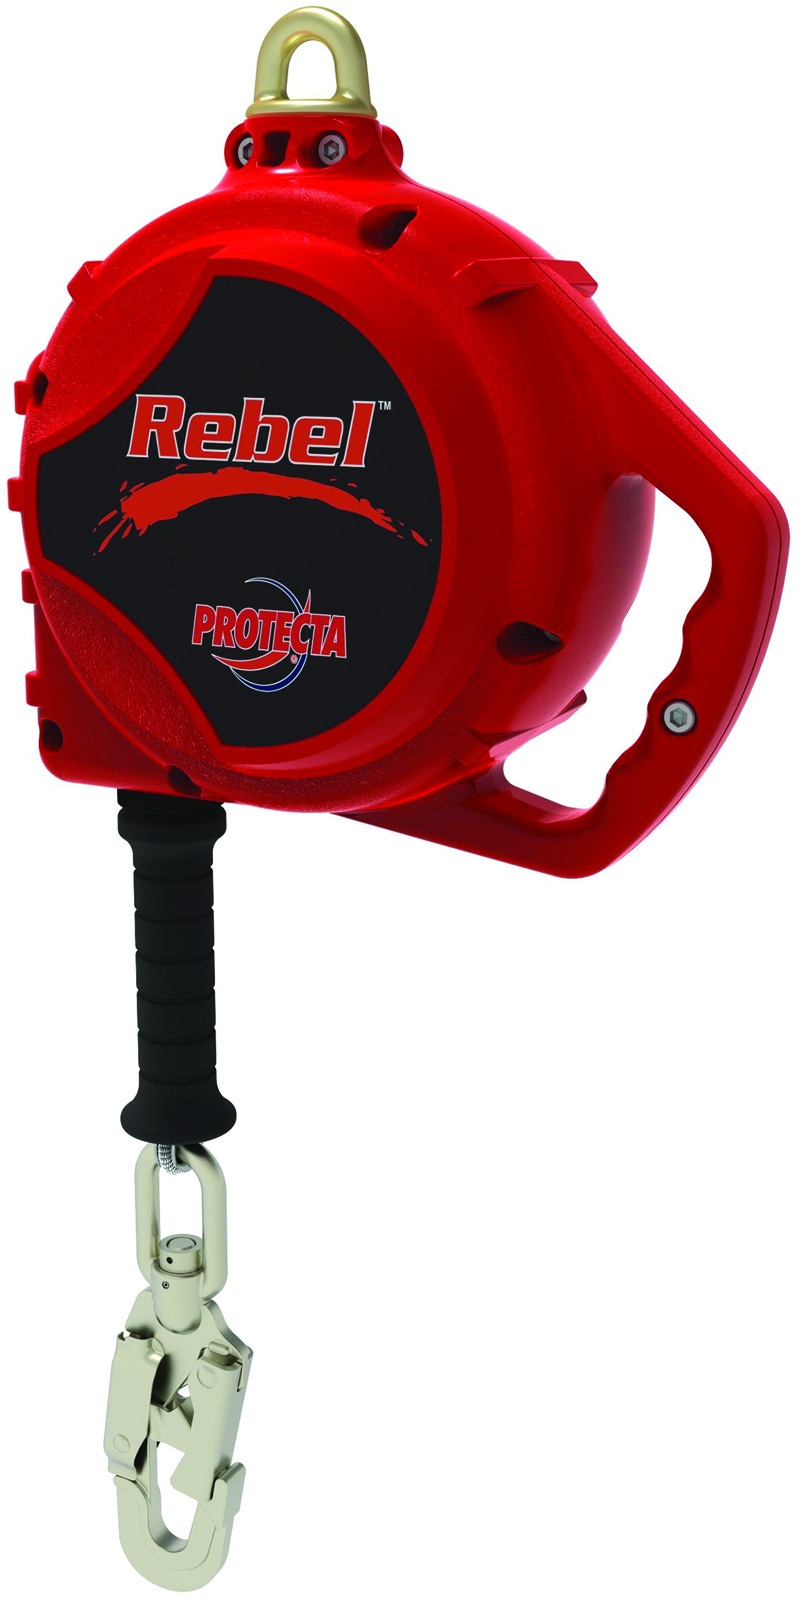 Protecta 3590500 Rebel 33' SRL from Columbia Safety